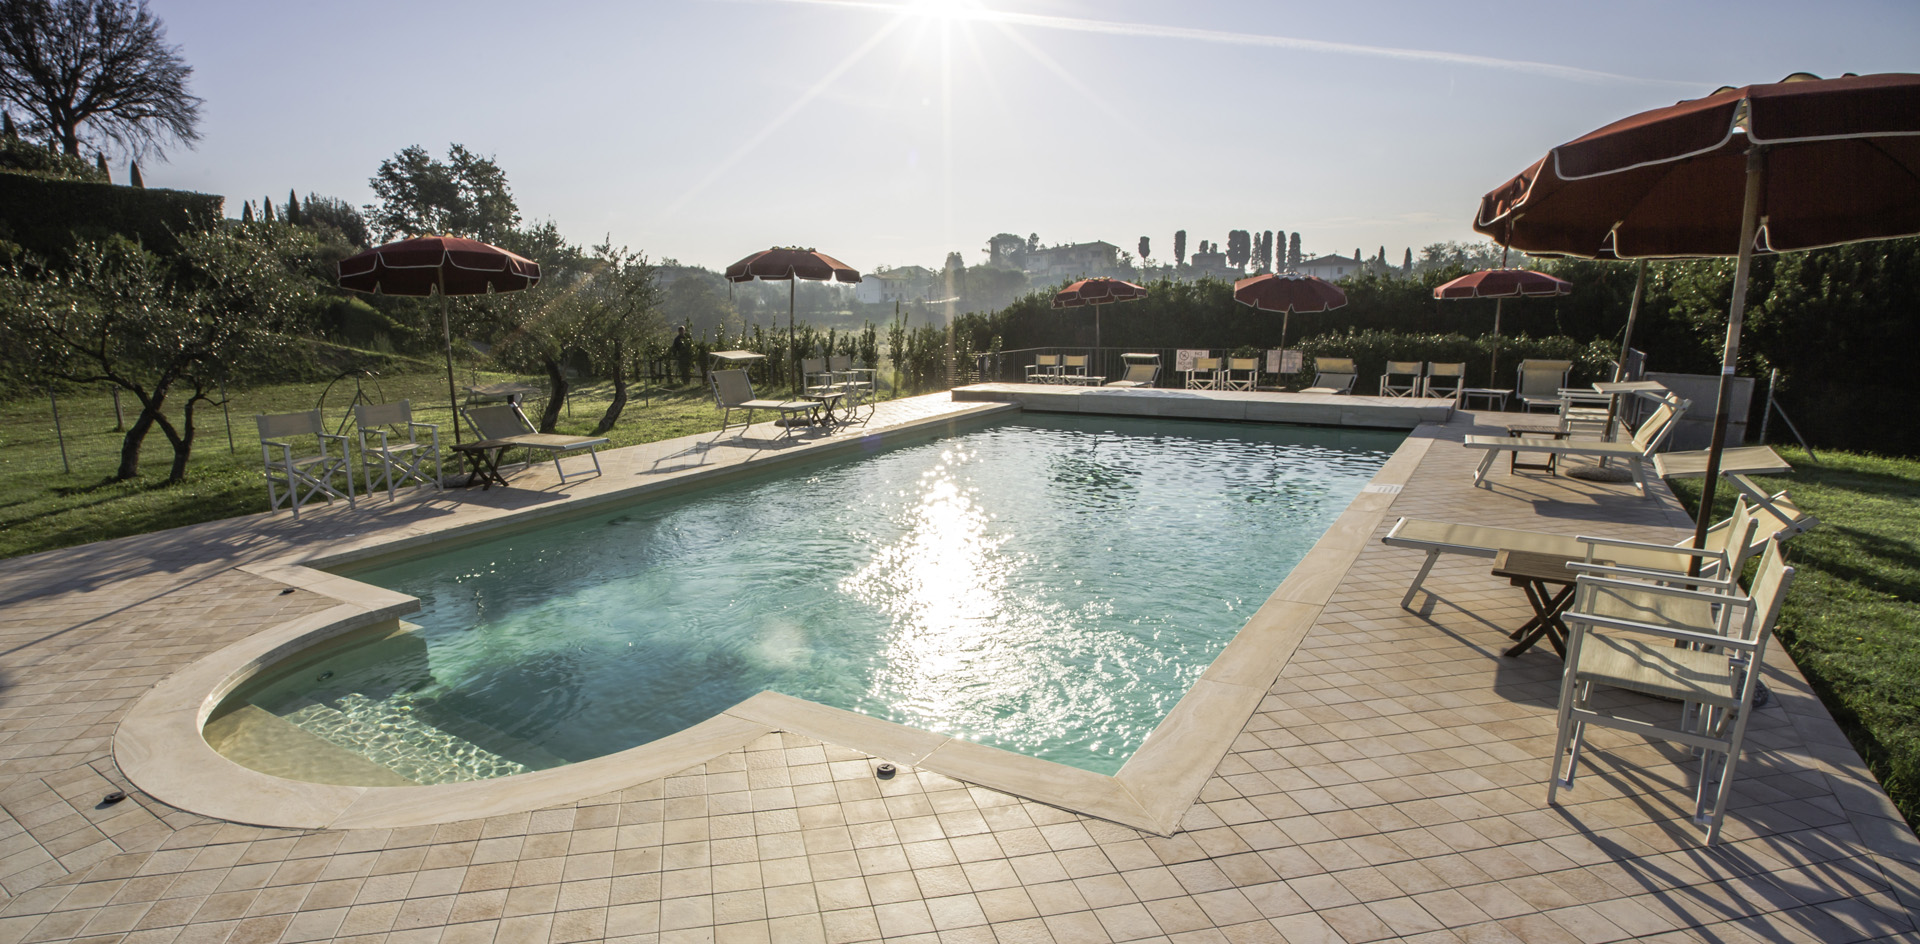 Relax by the pool surrounded by the olive trees and cypresses of Tuscany